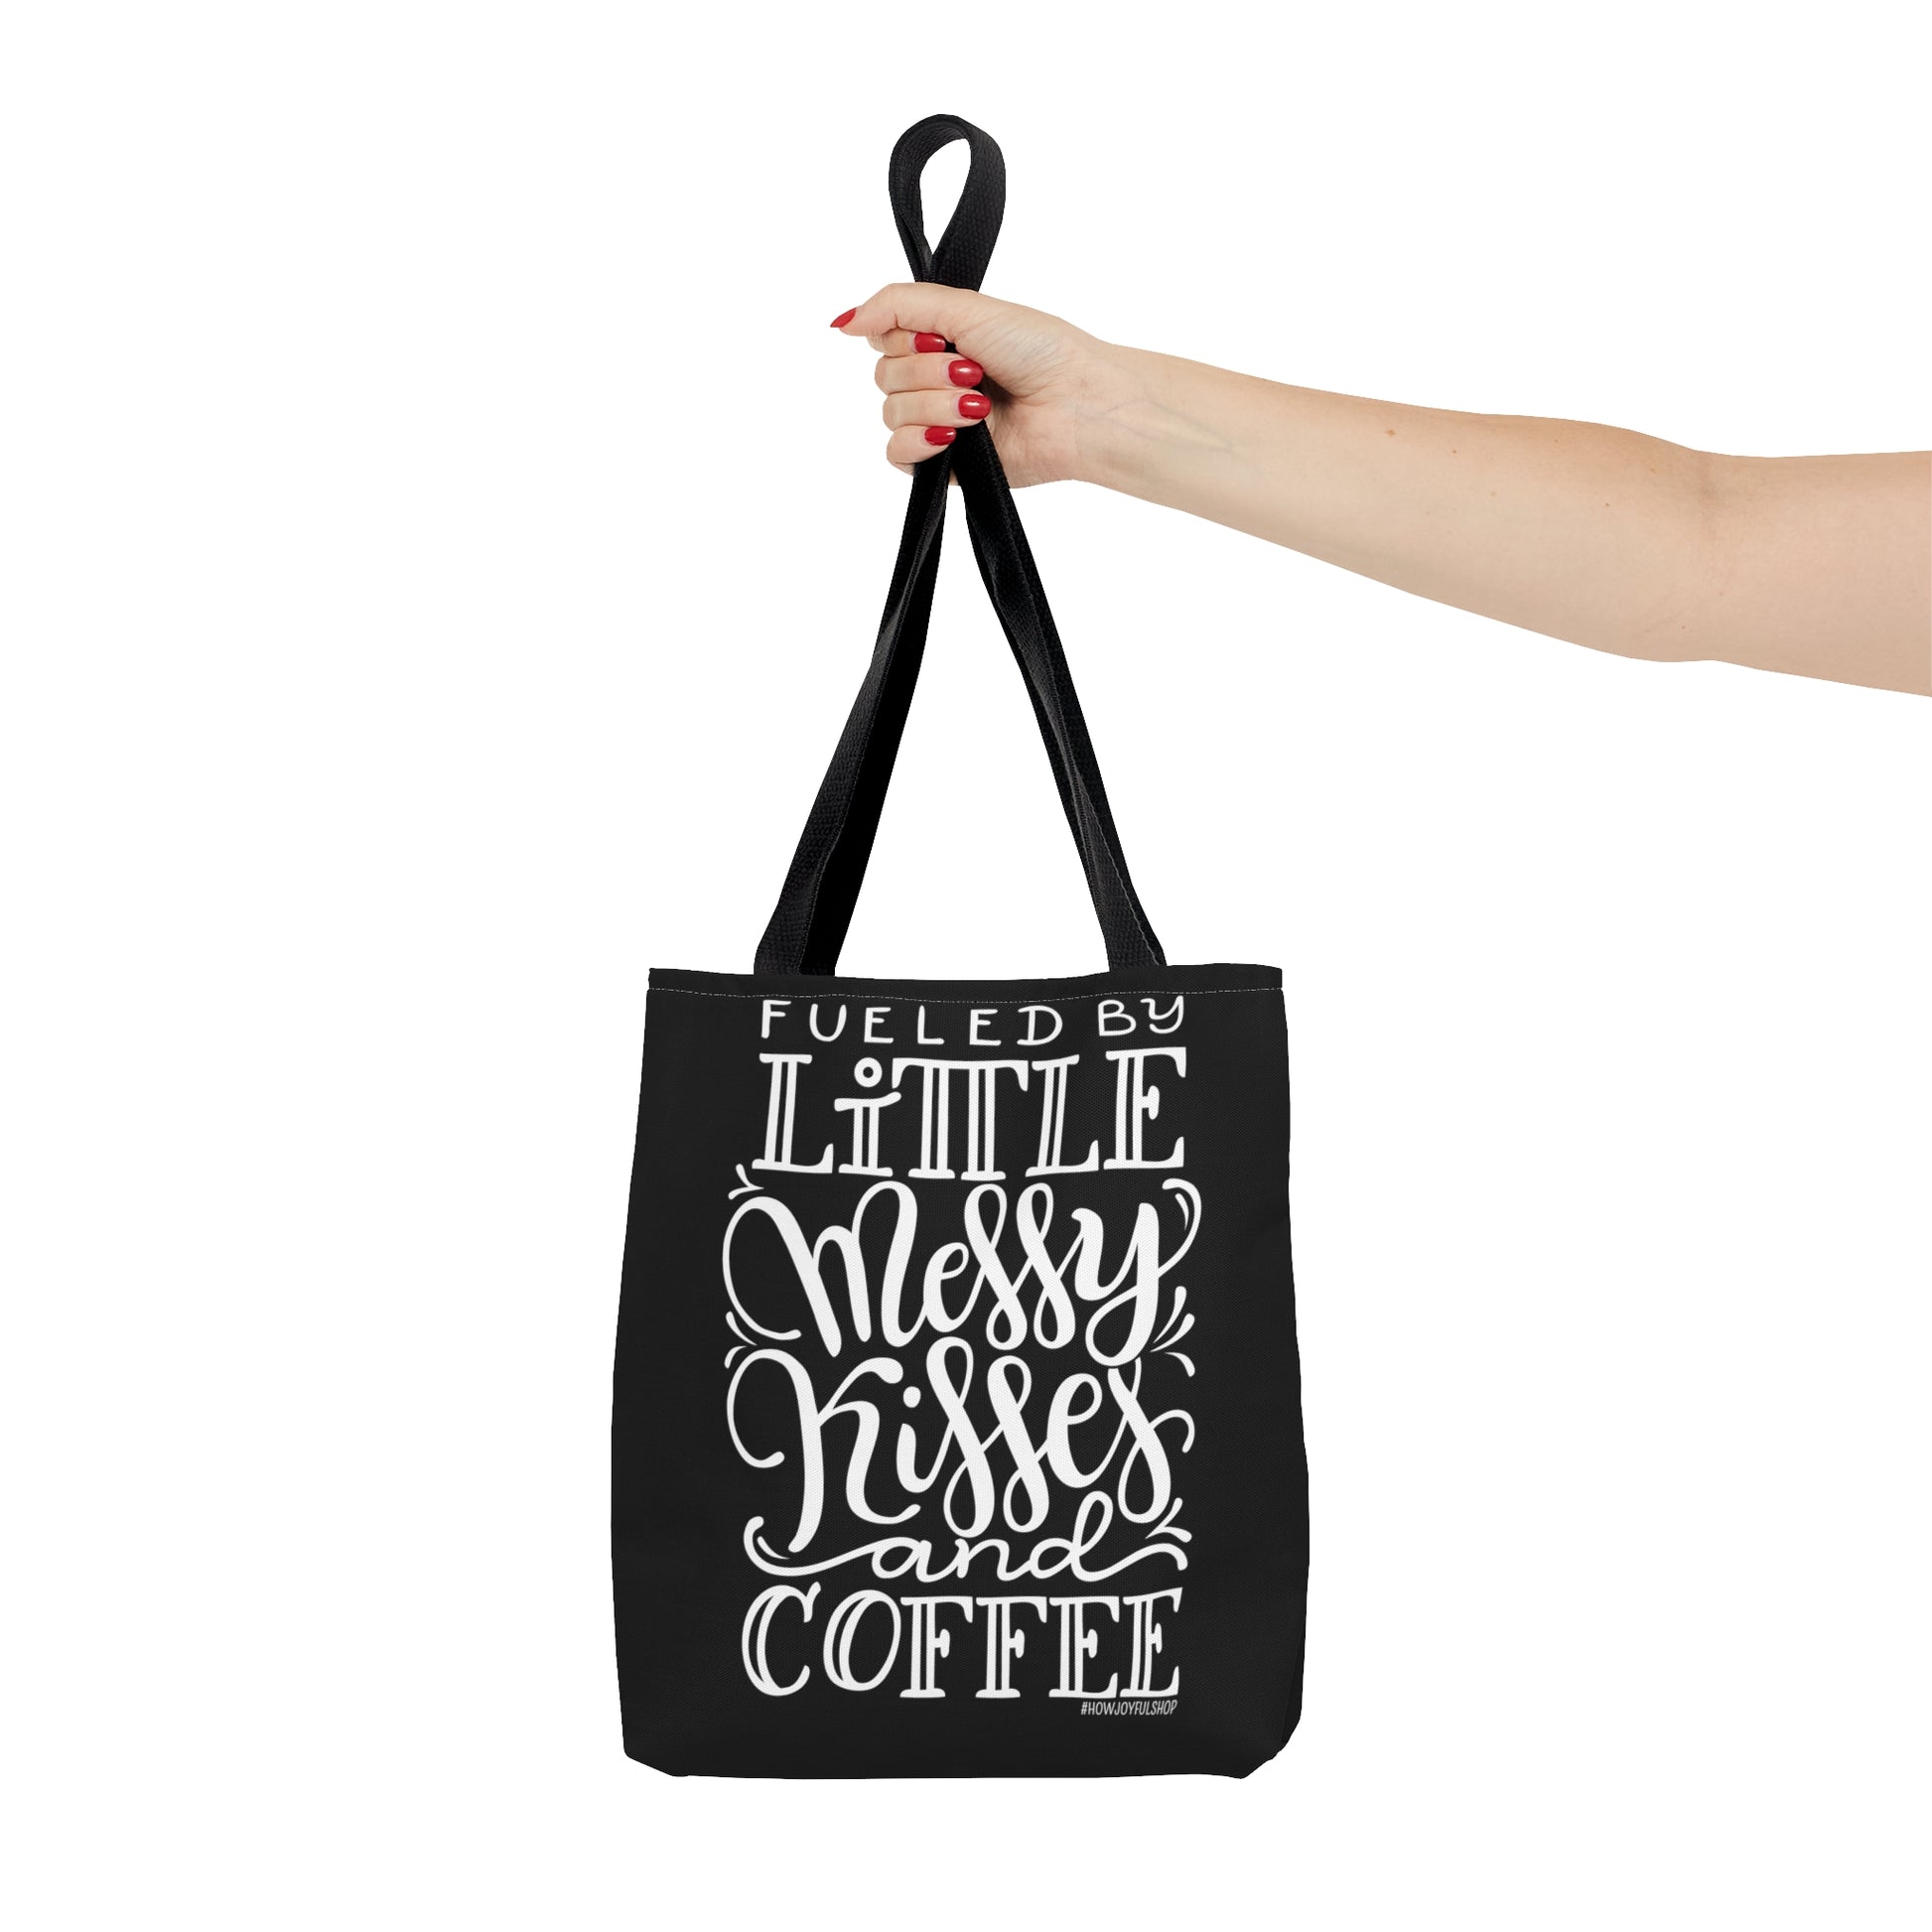 Fueled by little messy kisses and coffee - Tote Bag - howjoyfulshop